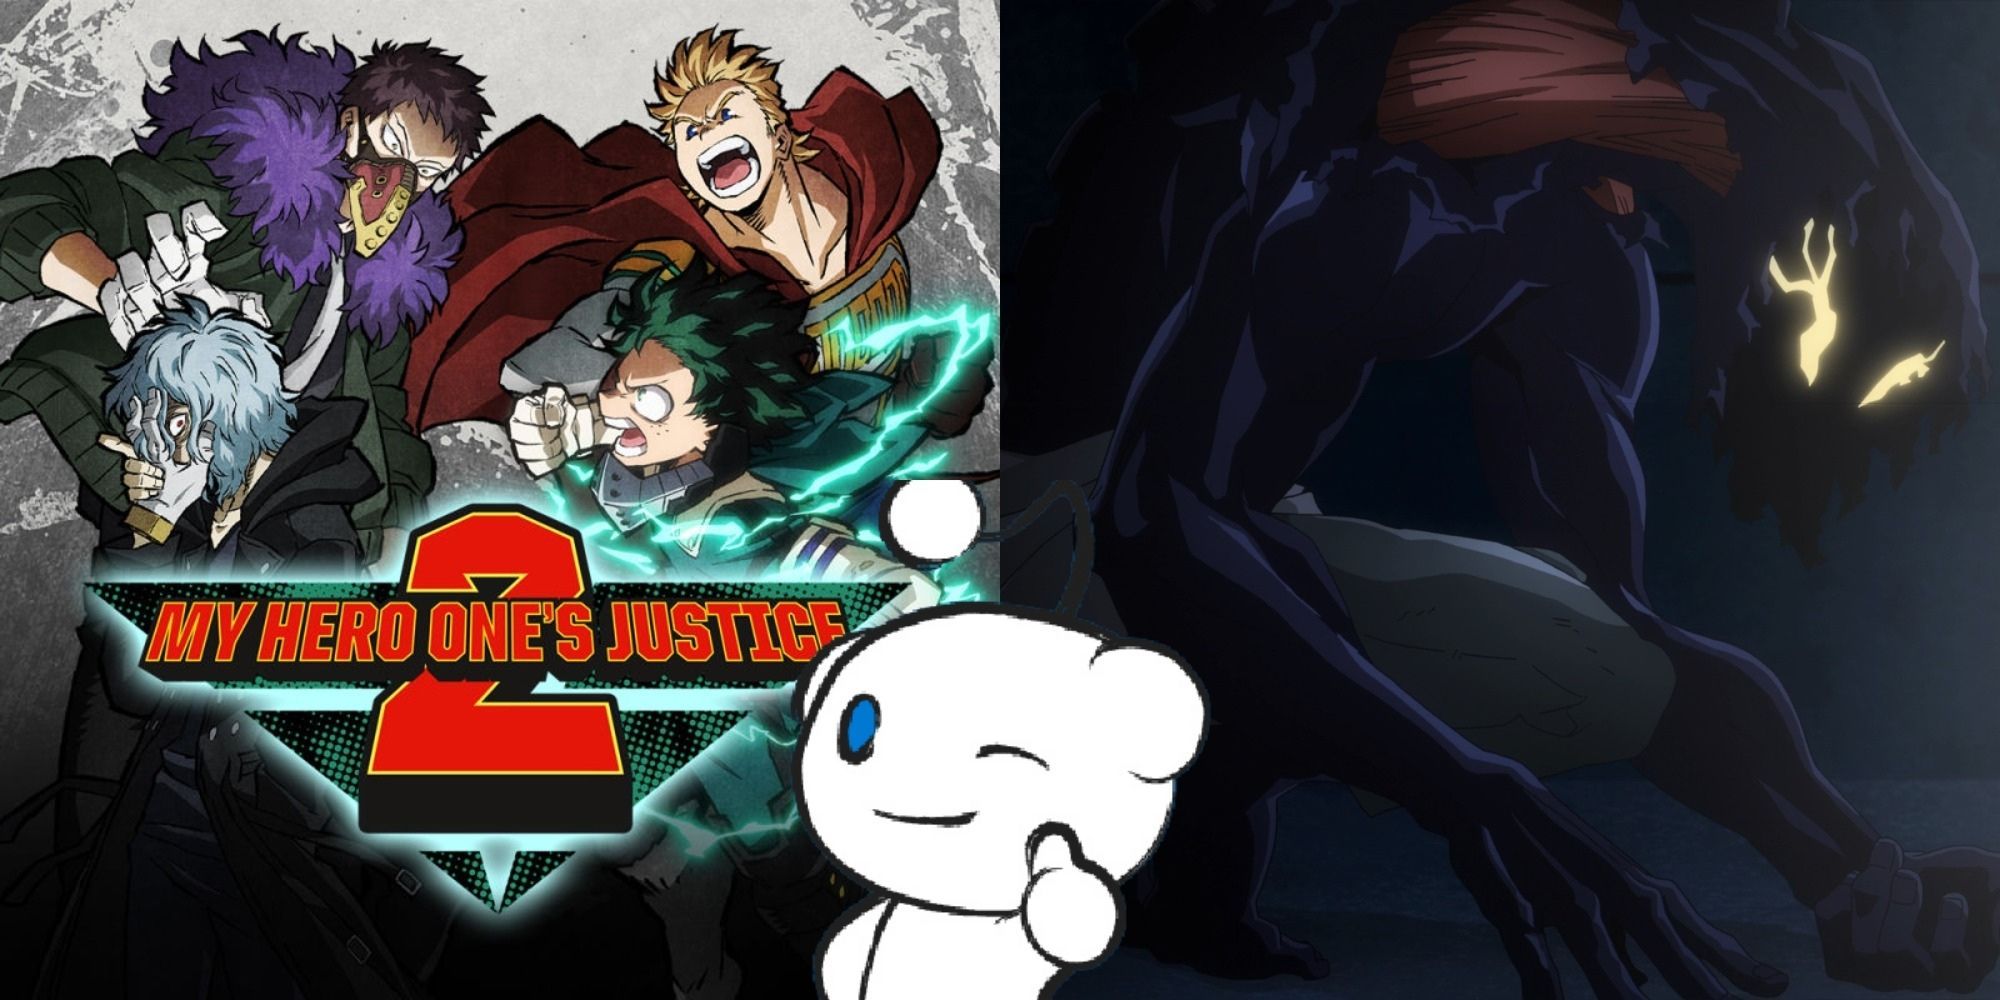 Split image showing the cover for My Hero One's Justice 2 and Hood, and Snoo from Reddit